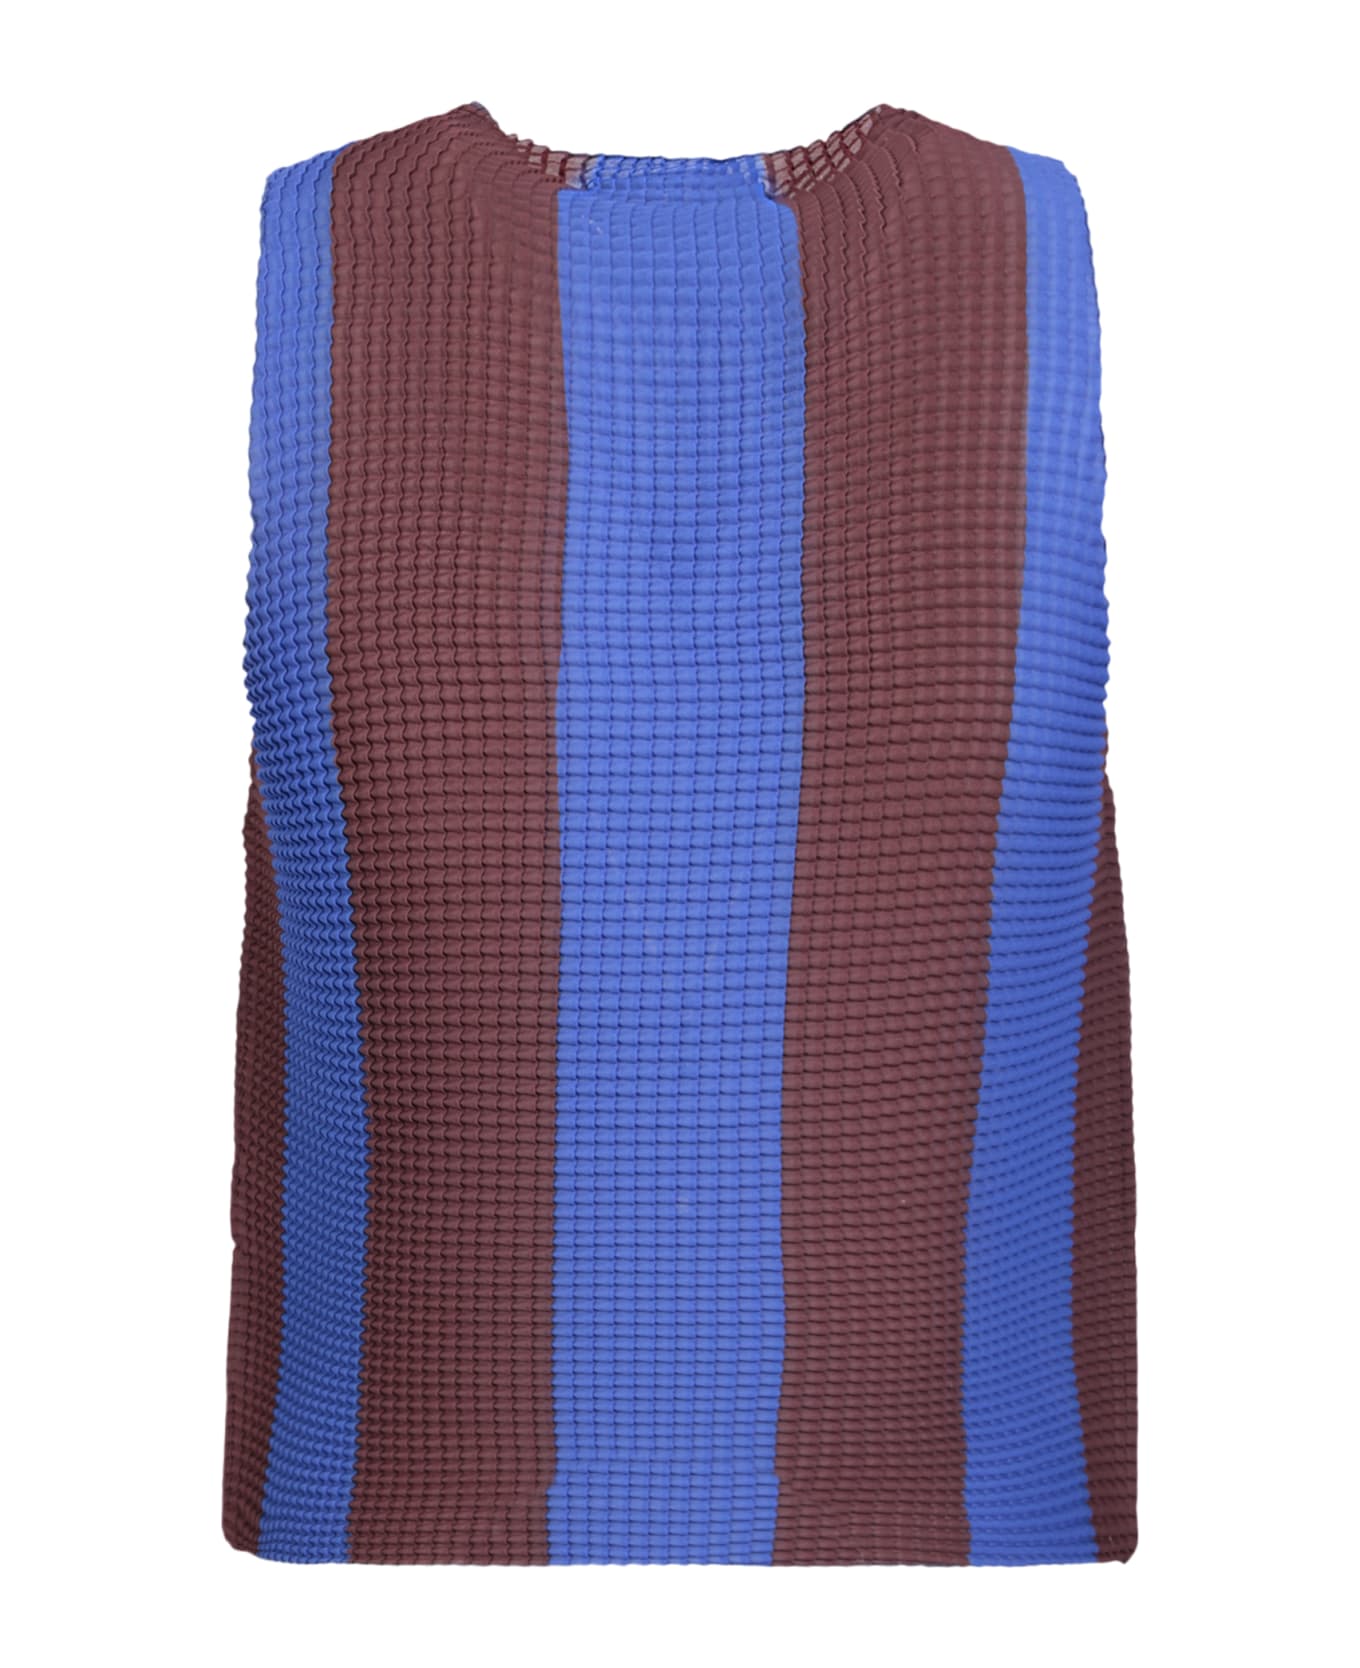 Sunnei Blue/brown Pleated Top - Blue